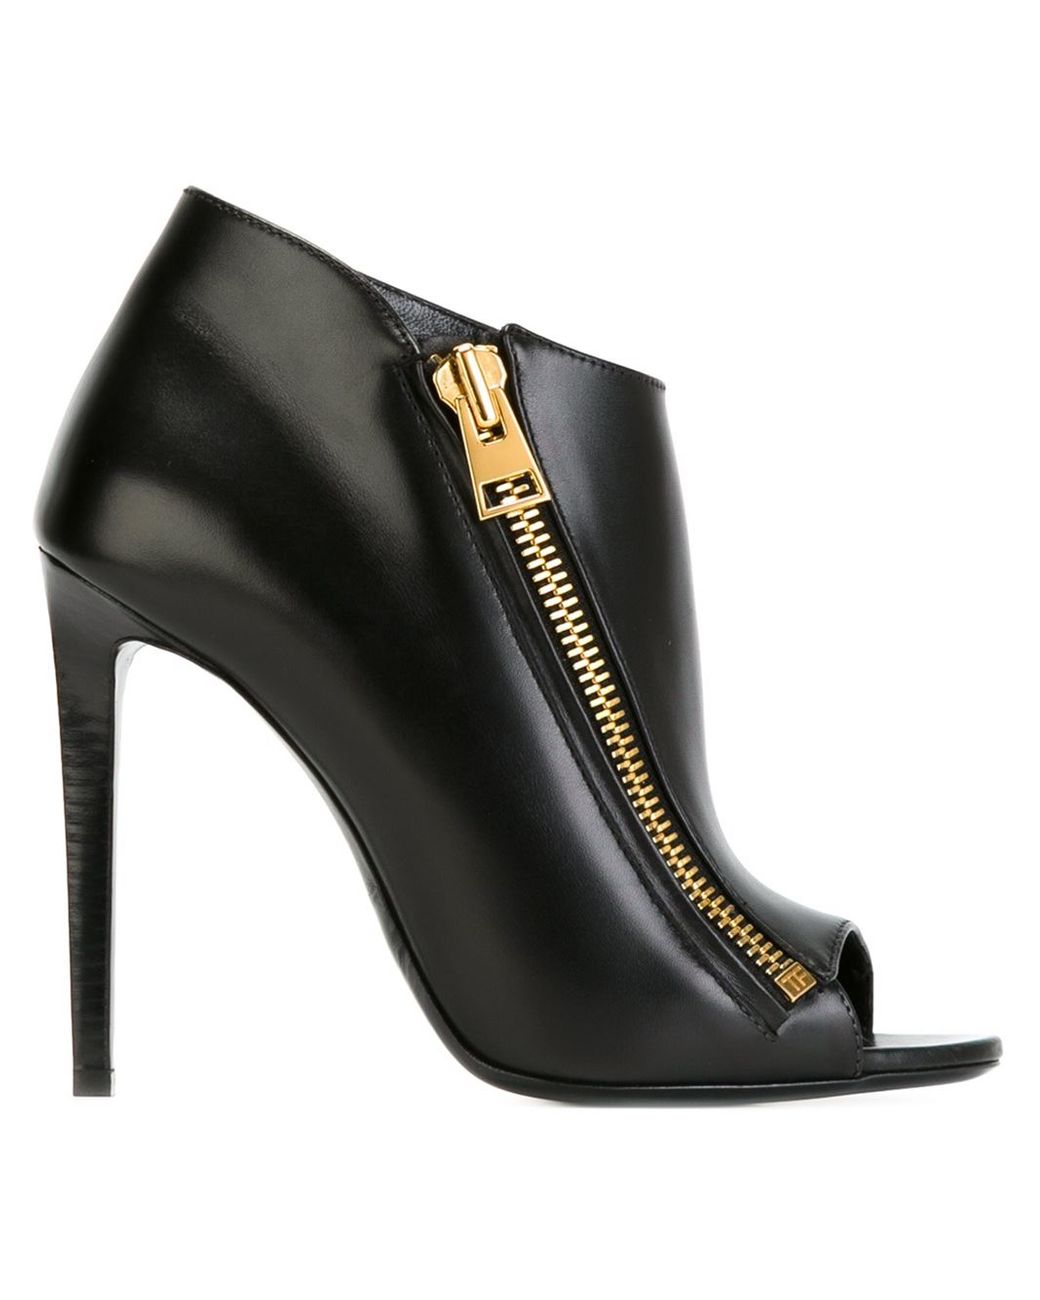 Tom Ford Side Zip Peep Toe Ankle Boots in Black